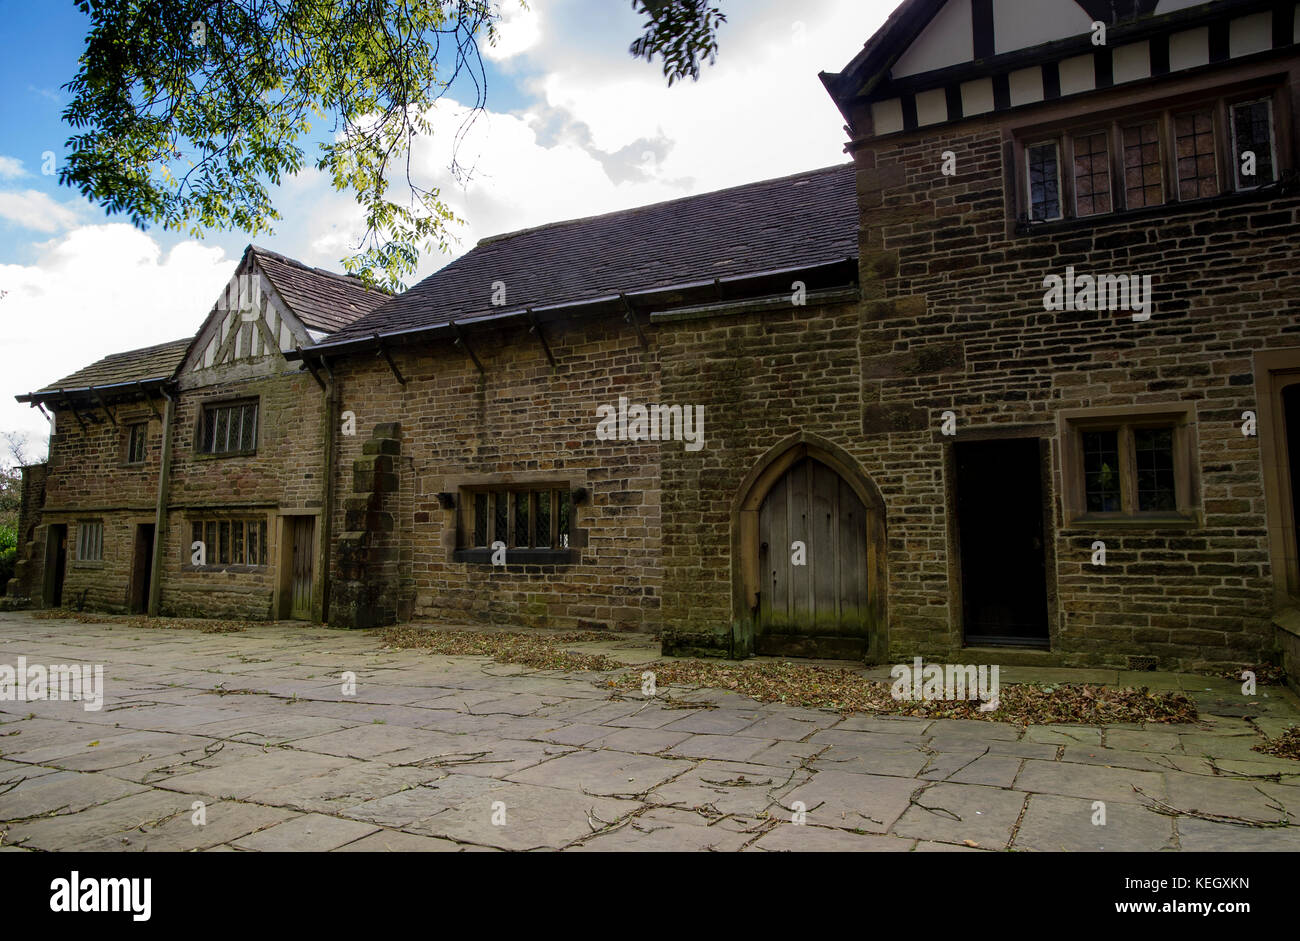 Smithills Hall, Bolton, Lancashire. Picture by Paul Heyes, Tuesday October 17, 2017. Stock Photo